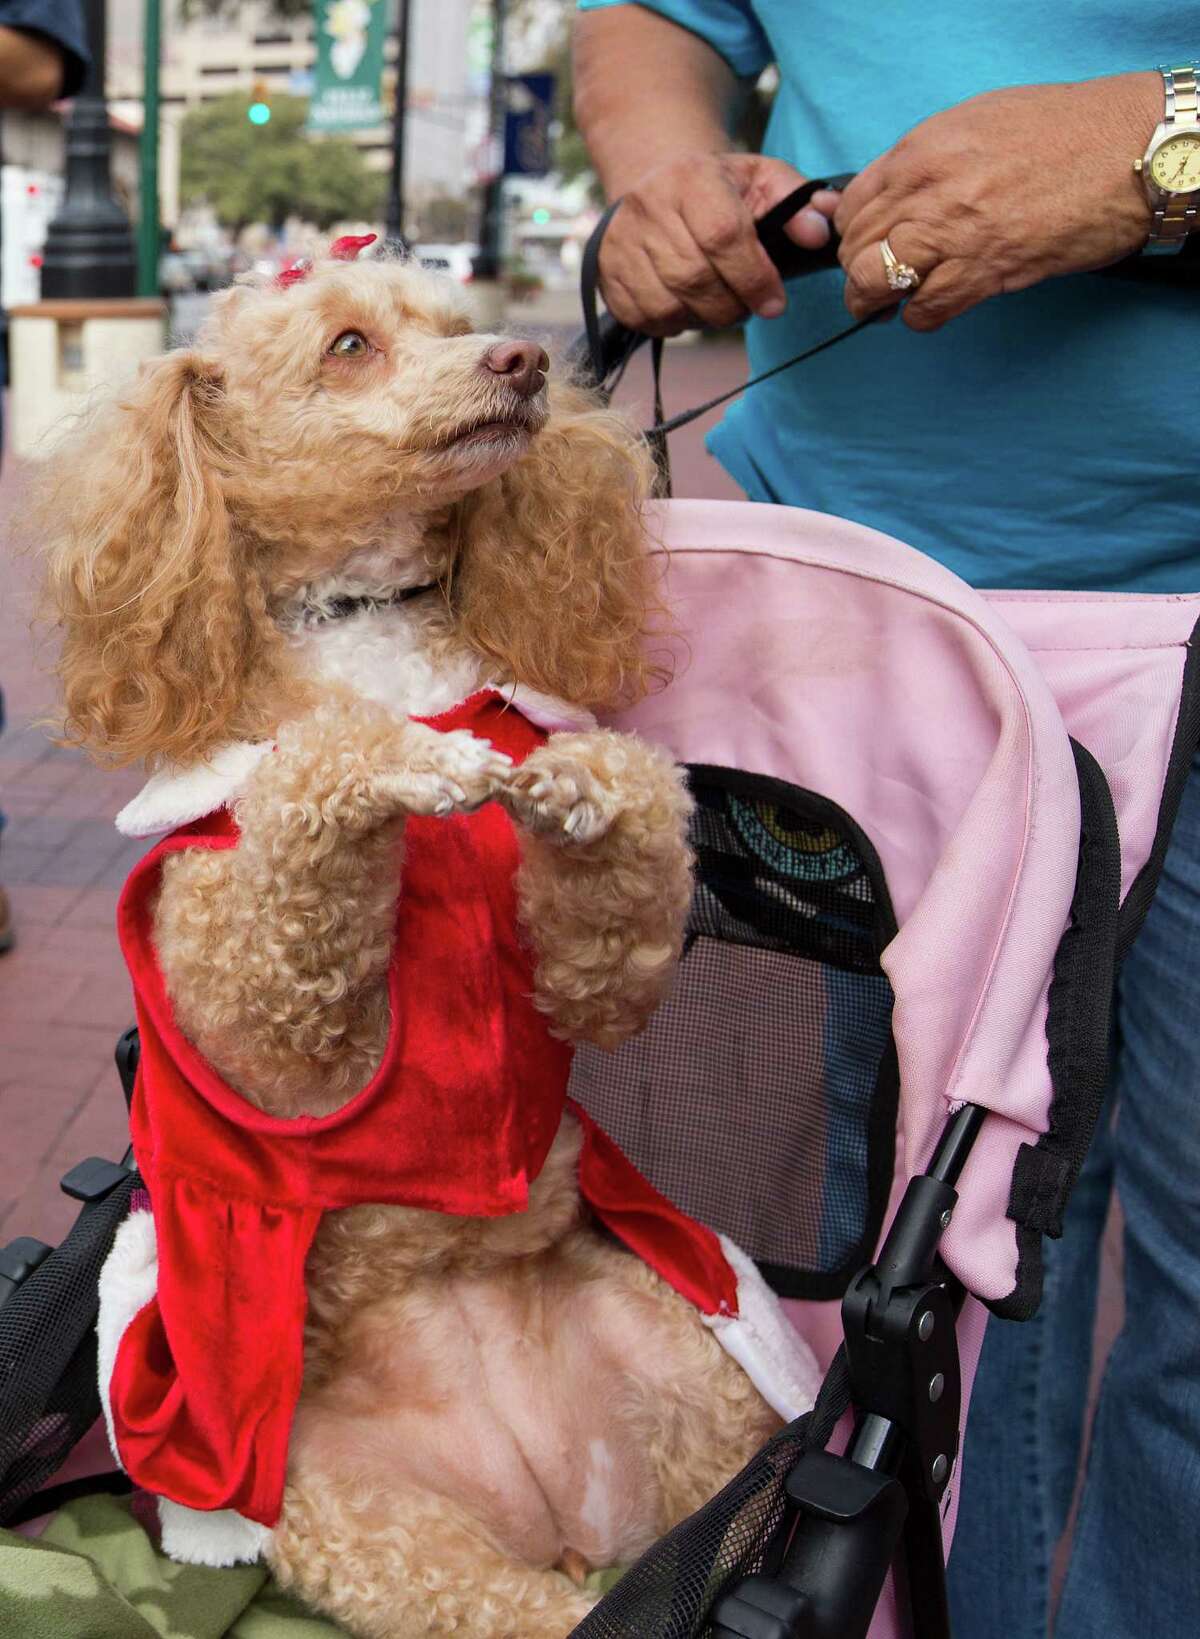 Princess Amelie, a toy poodle owned by Tacho and Maria Carrizales, performs a trick during the 26th annual Blessing of the Animals at Market Square on Saturday, Dec. 8, 2012.